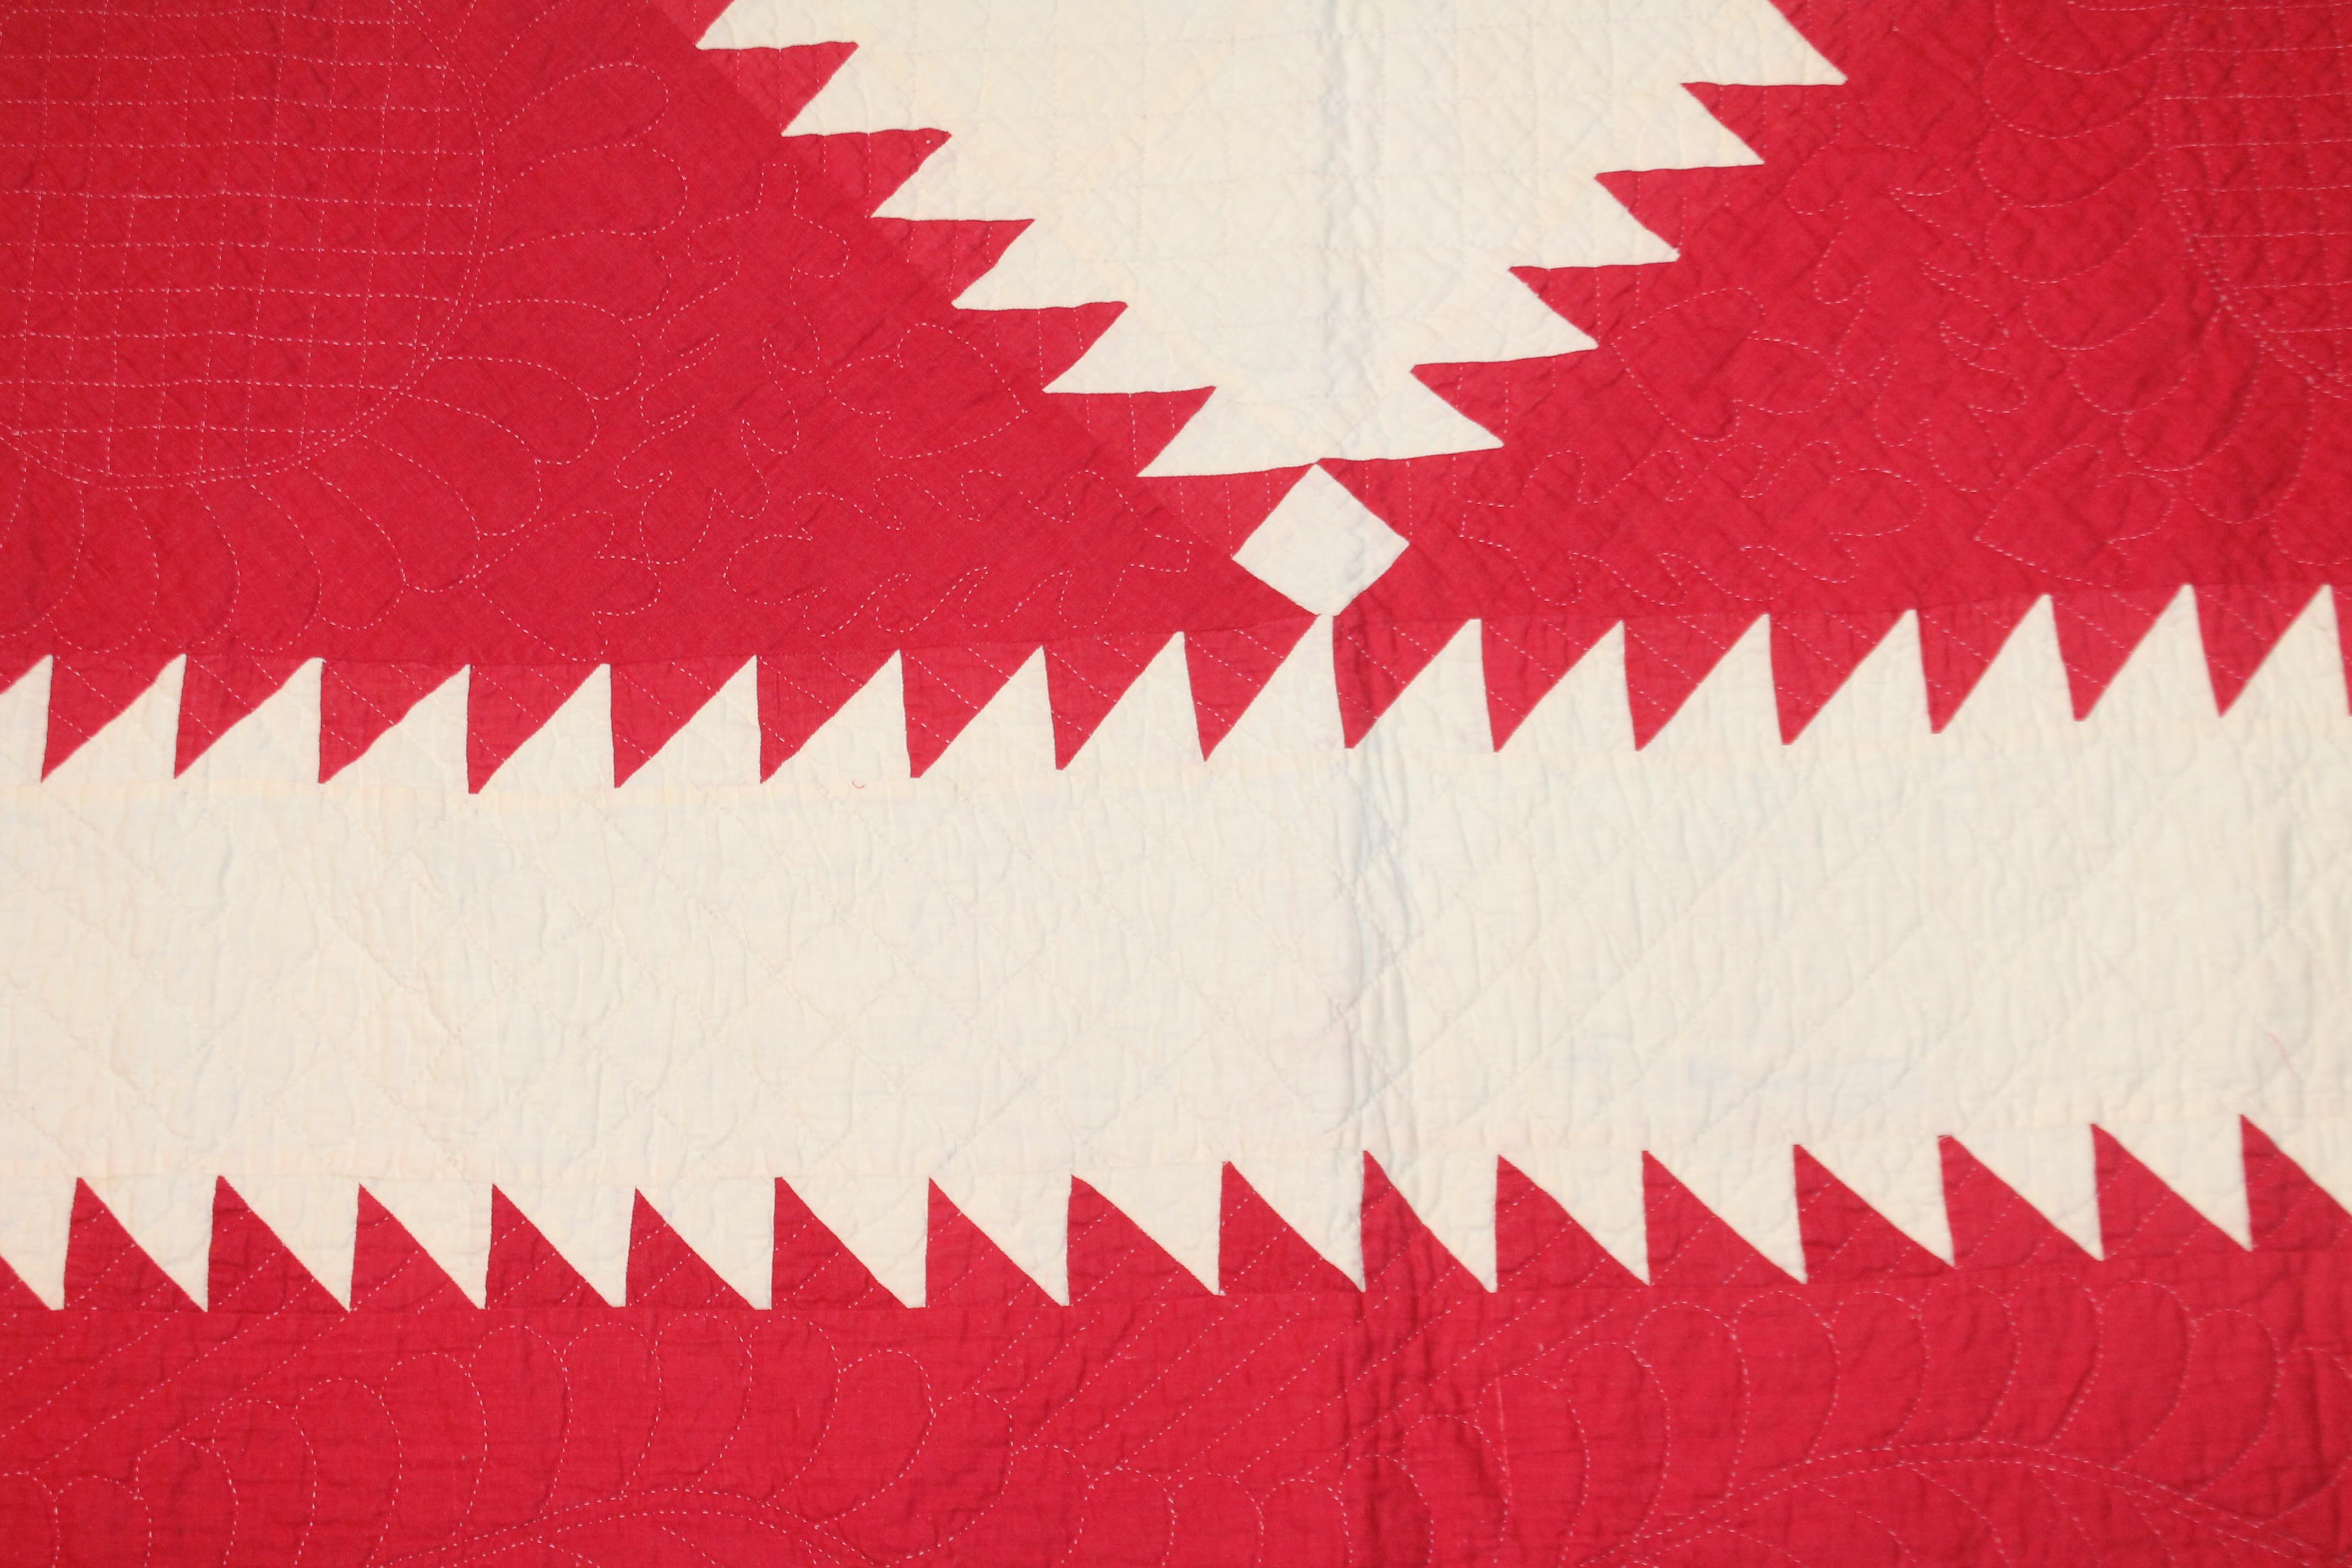 Adirondack Antique Quilt Red and White Saw Tooth Diamond